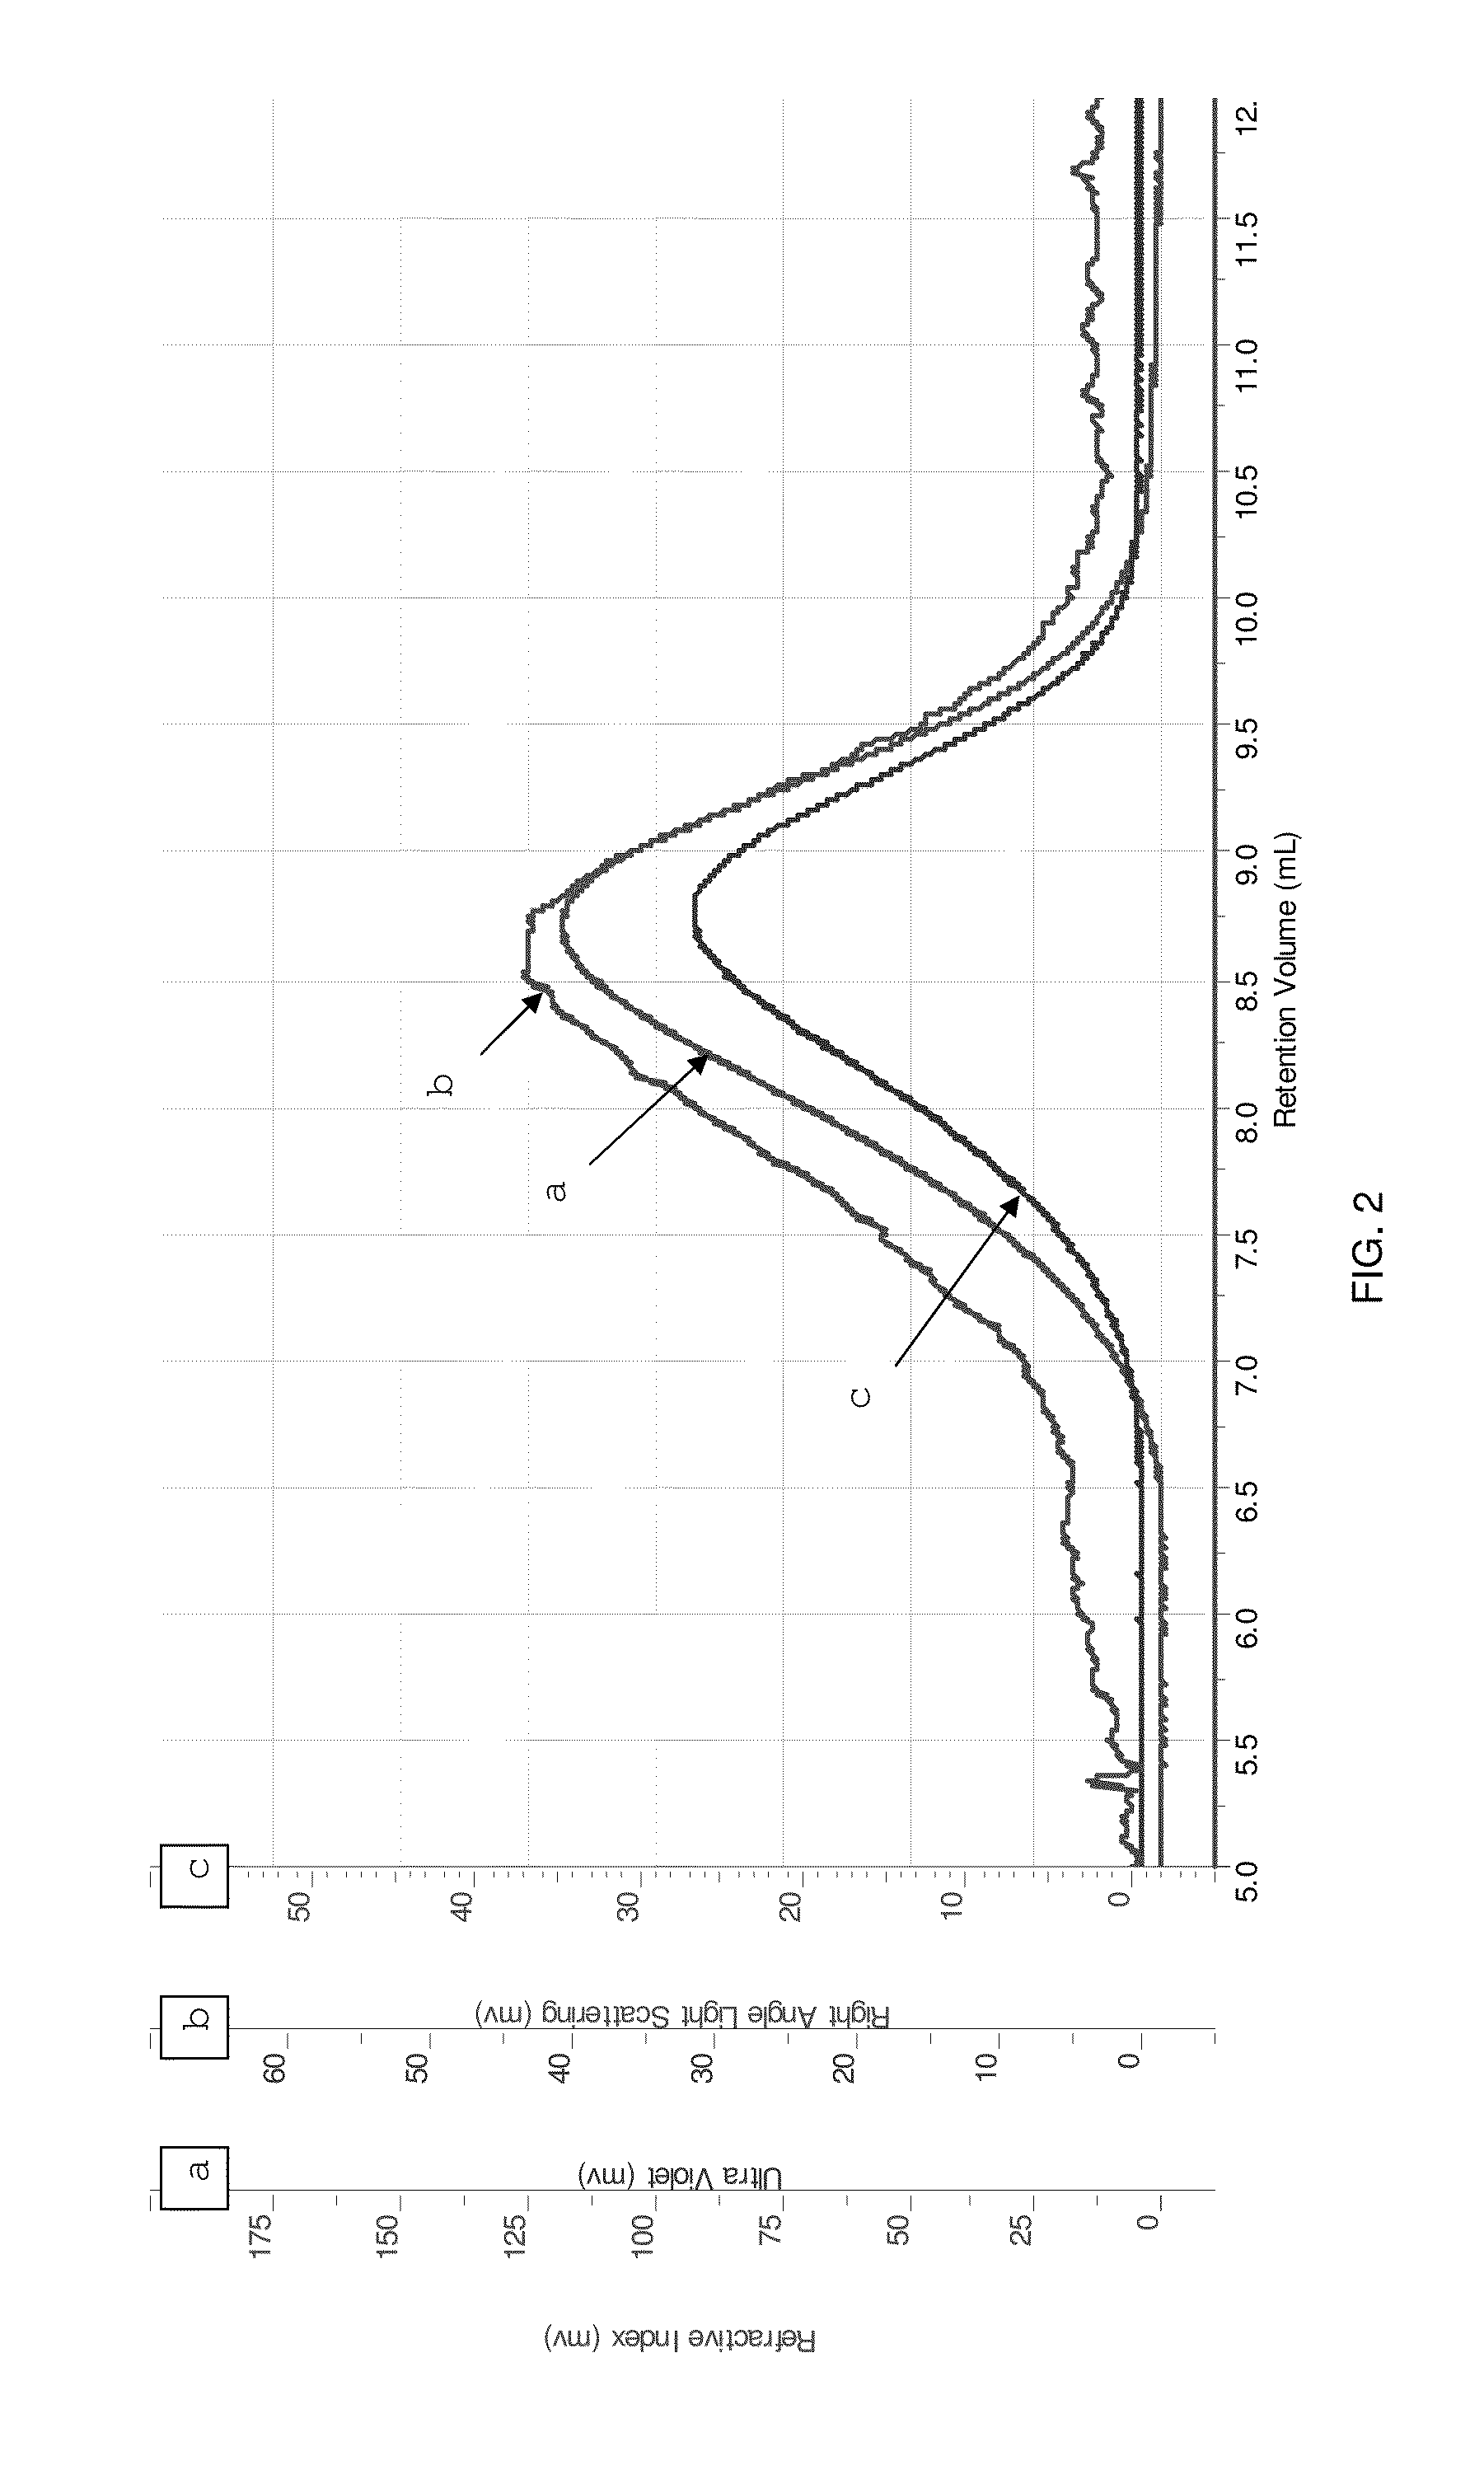 Glycosylated modified flavin adenine dinucleotide-dependent glucose dehydrogenases, compositions thereof as well as methods of making and using the same